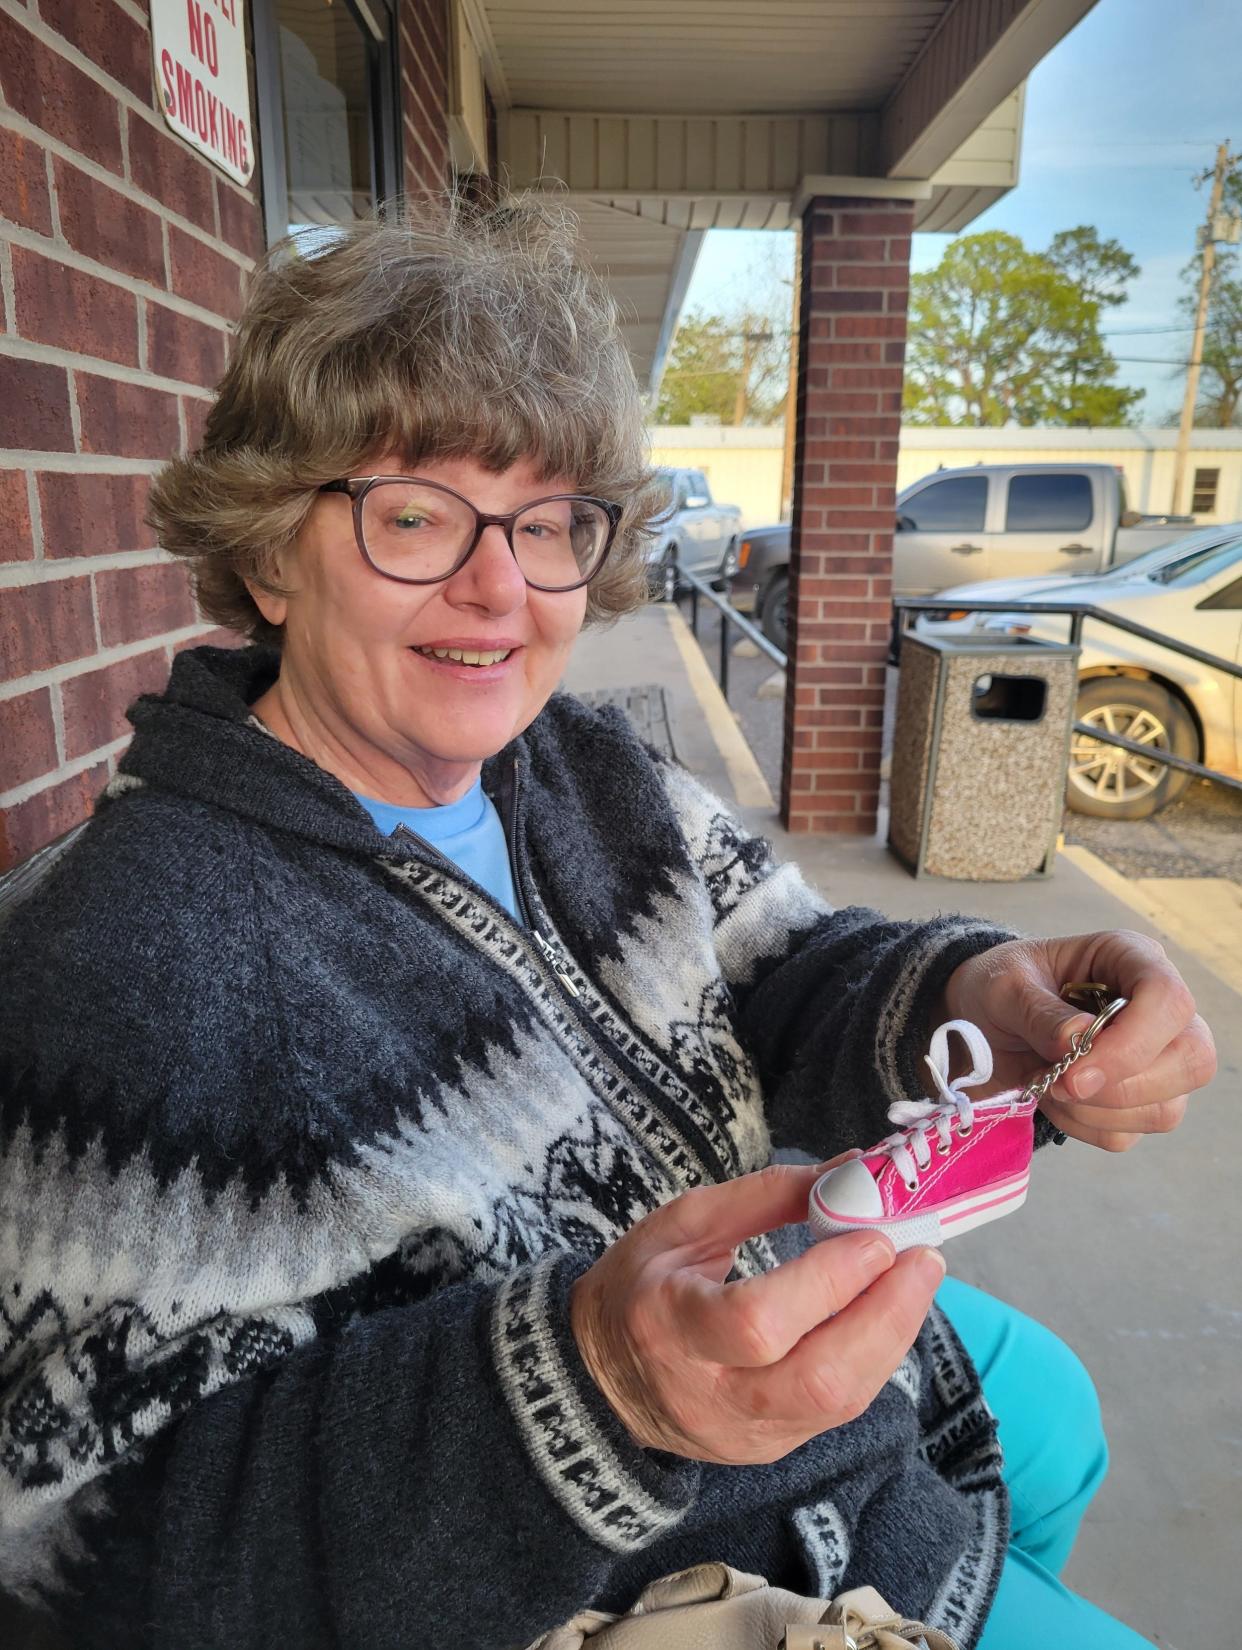 Lisa Rollings on April 12 holds up the key chain she won in a dance contest at the 2023 Footloose Festival in Elmore City, Oklahoma. The 1984 movie "Footloose," released 40 years ago this year, is based on the successful efforts of Elmore City High School students to organize the school's first prom in 1980. Rollings attended the first prom as a sophomore server, and she went on to help launch Elmore City's annual Footloose Fest, which takes place the third Saturday of April.